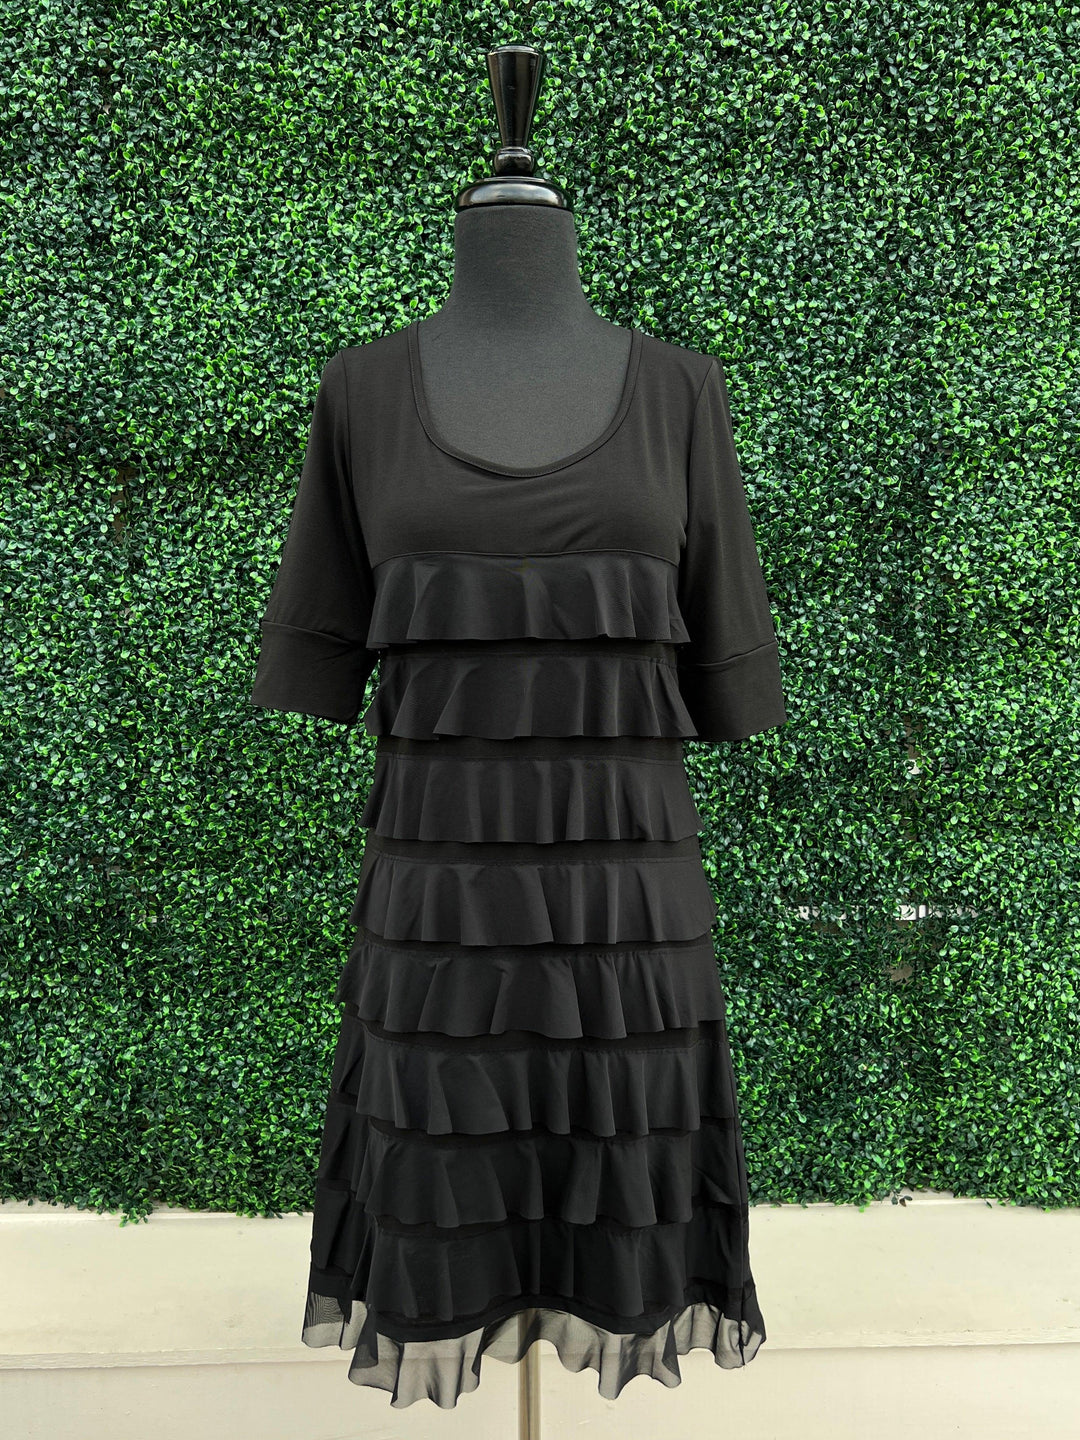 Little black dress for women over 50 to hide insecurities tre chic